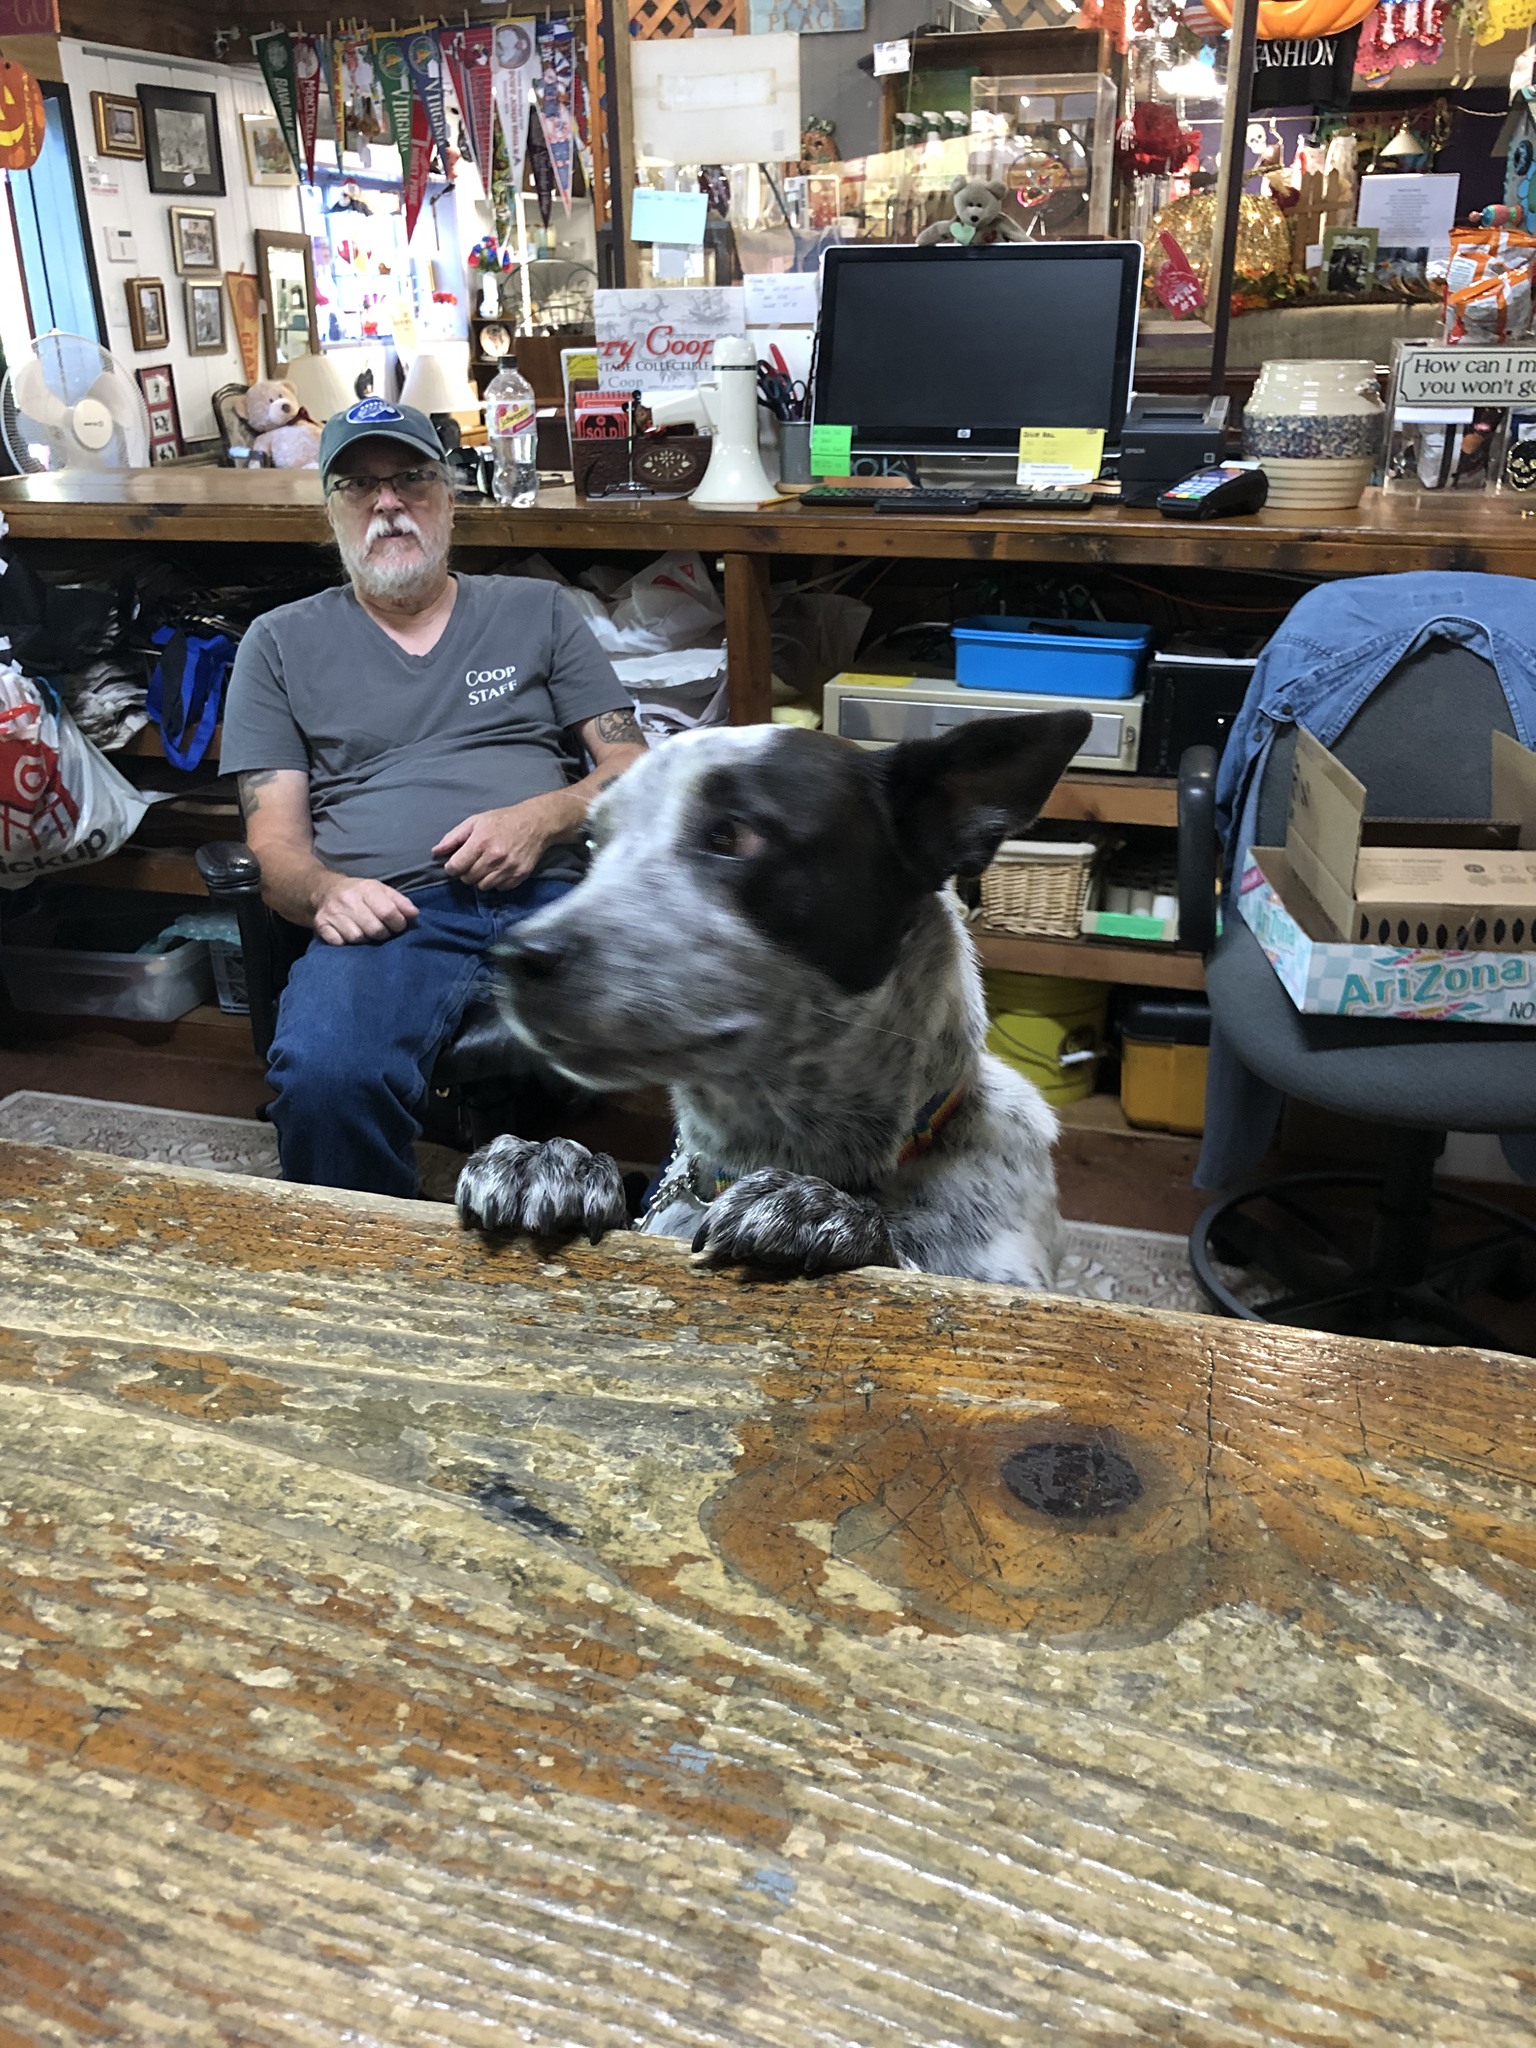 Scranberry Coop Snapshots - Jeff was tired, but Tosh jumped in to help! - Scranberry Coop - Vintage Store - Antiques, Collectibles, & More